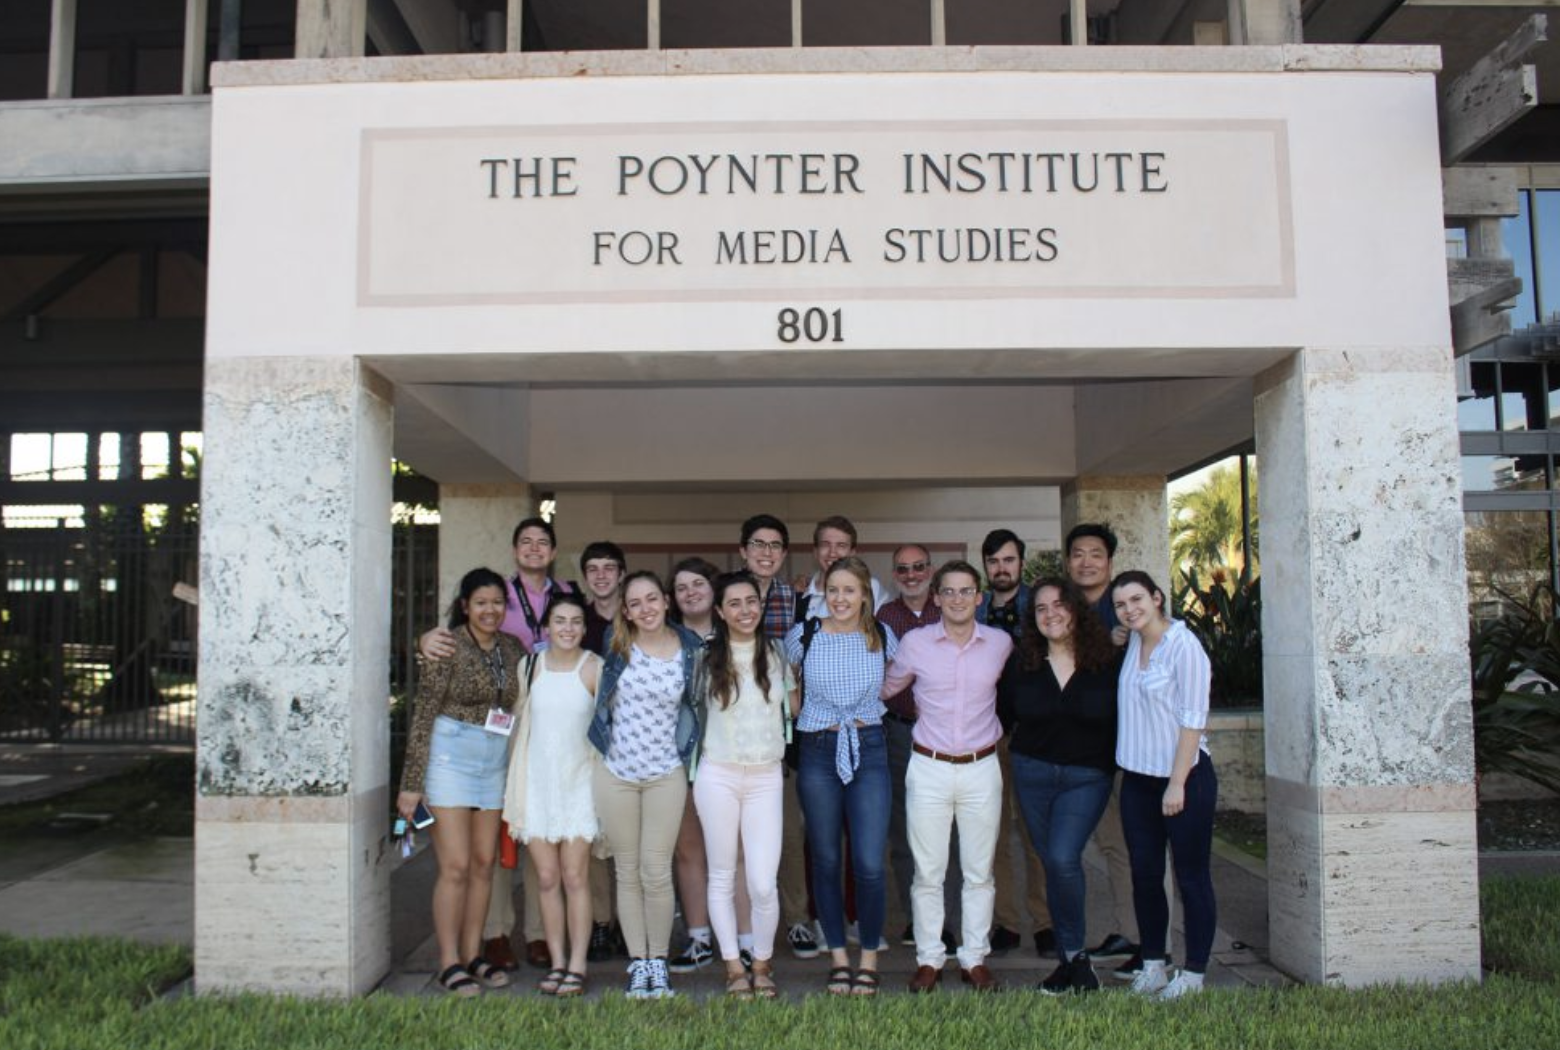 Students pose in front of the Poynter Institute in St. Petersburg, Florida.